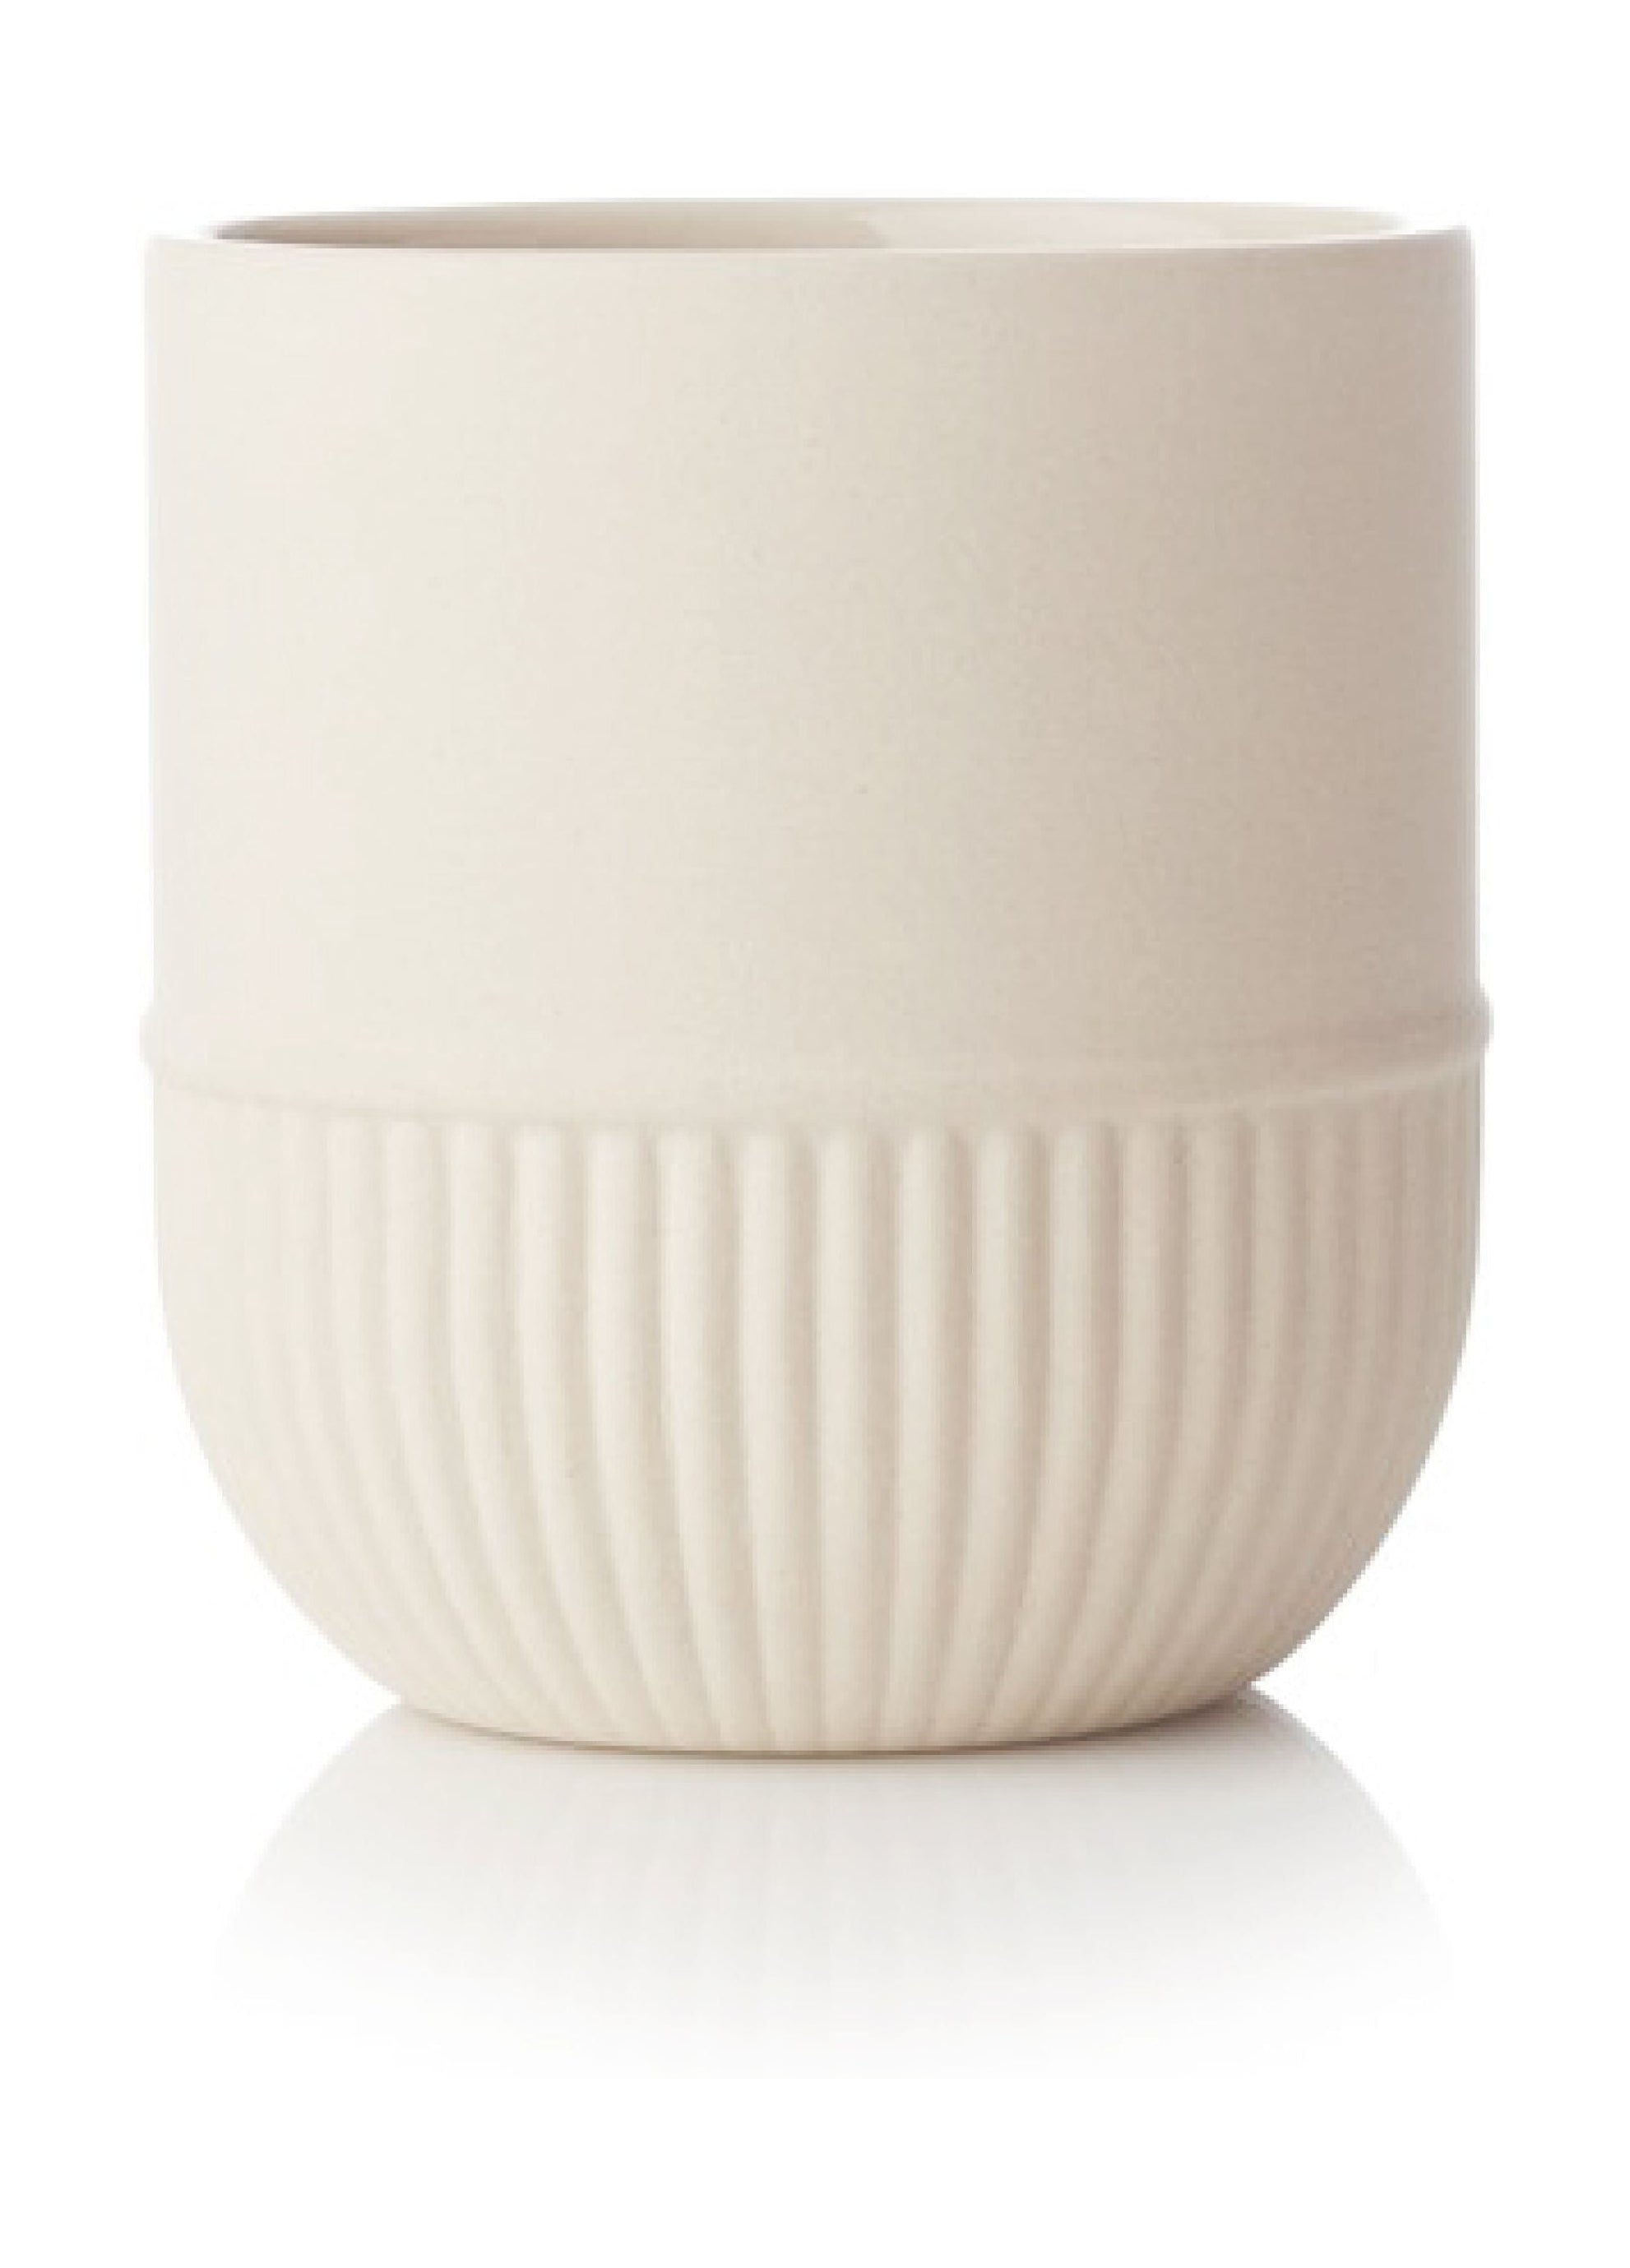 Malling Living Root Cup Big, Cream White